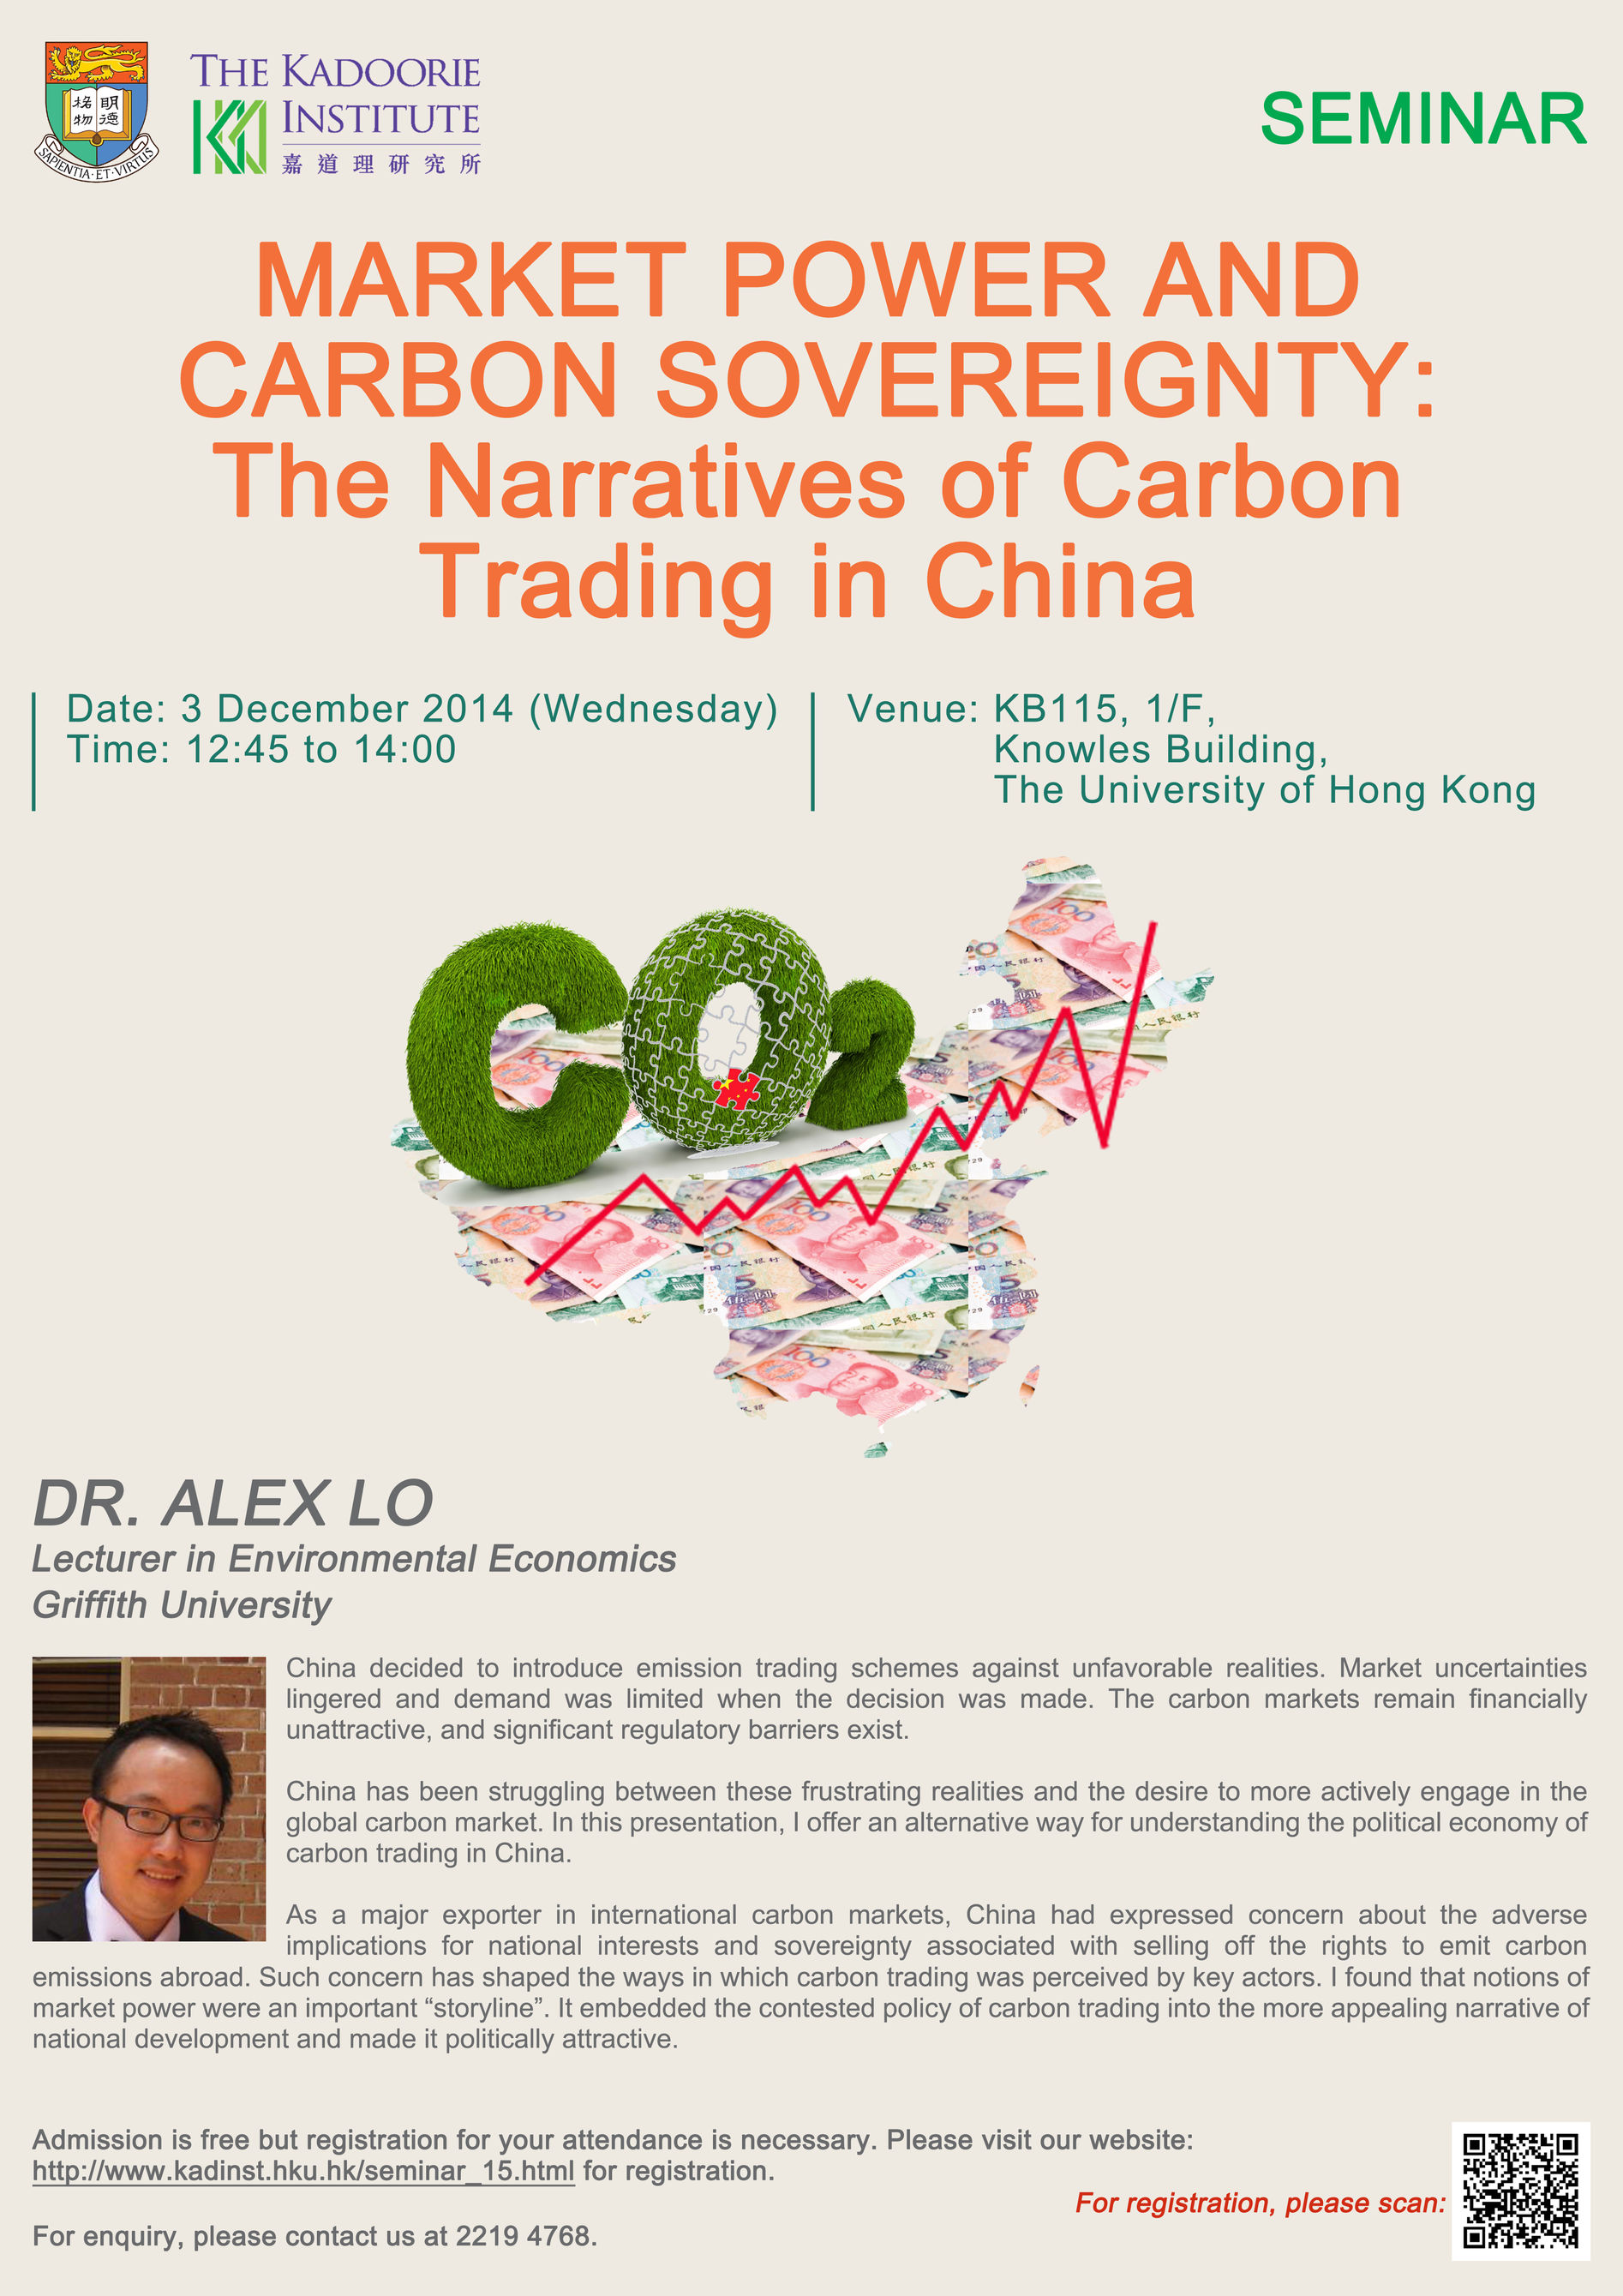 Seminar on Market Power and Carbon Sovereignty: The Narratives of Carbon Trading in China